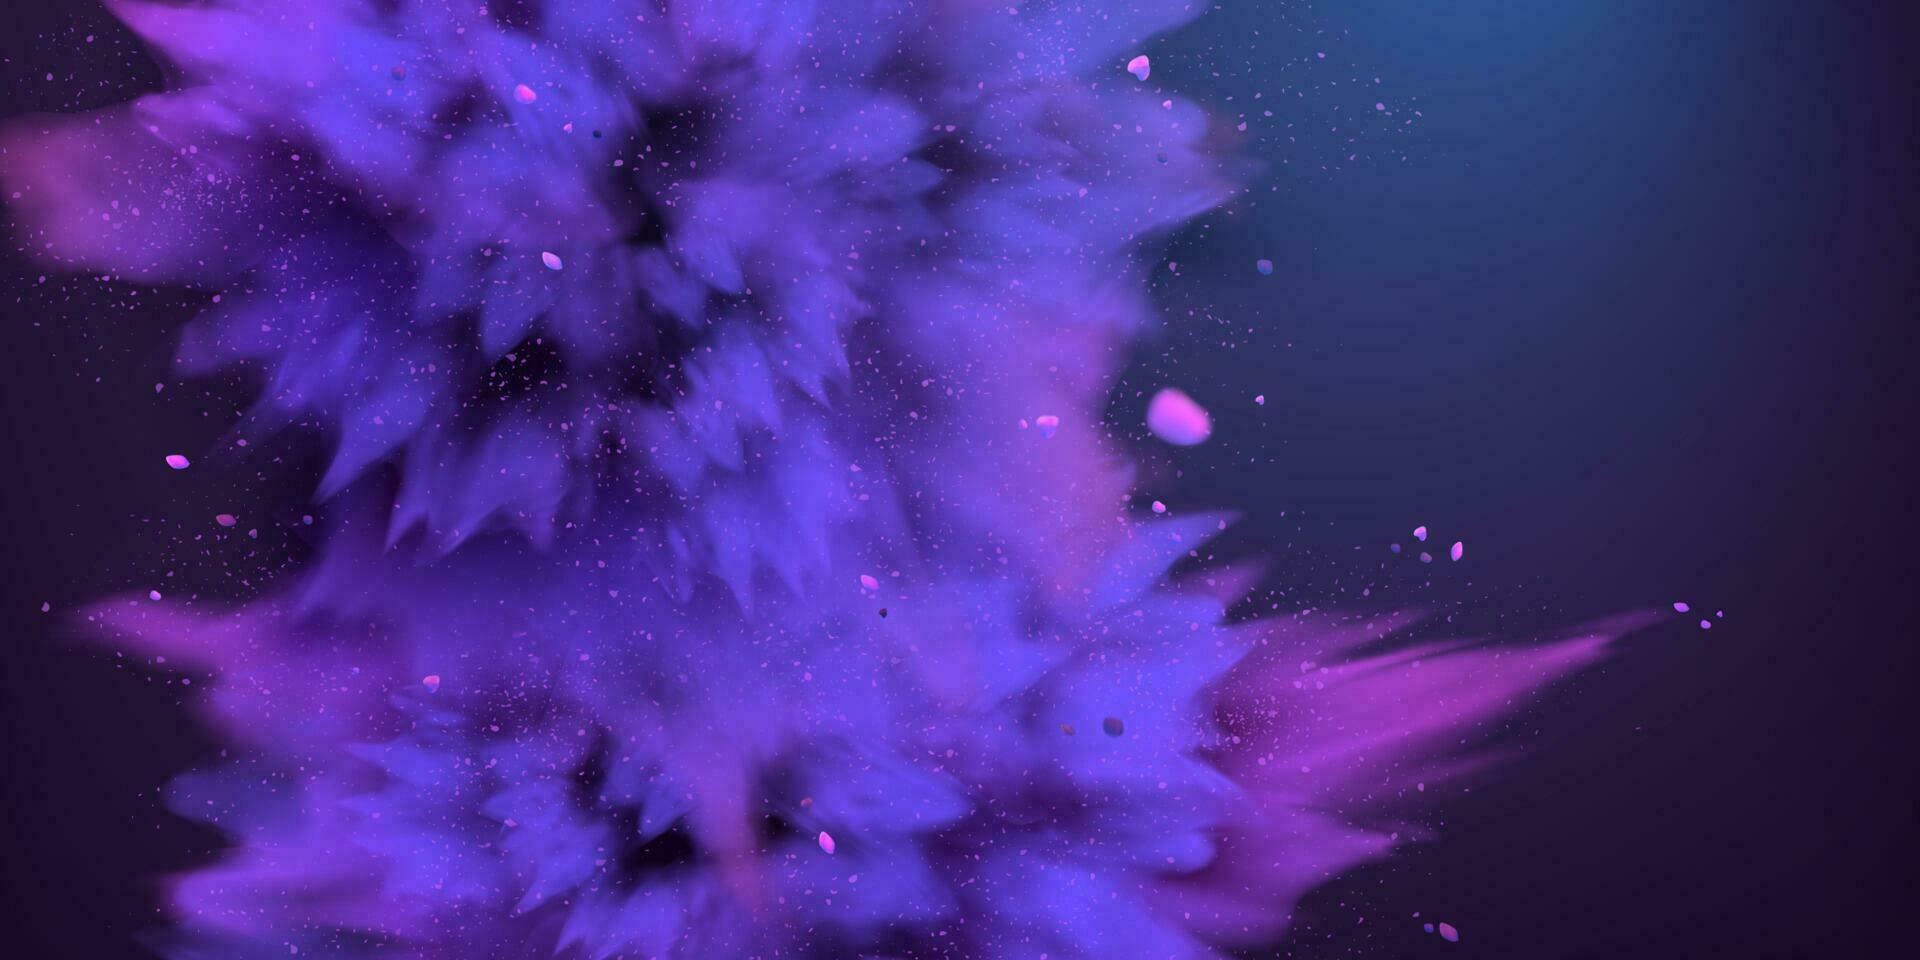 3d illustration of the purple colored powder with explosion effect on a dark background vector